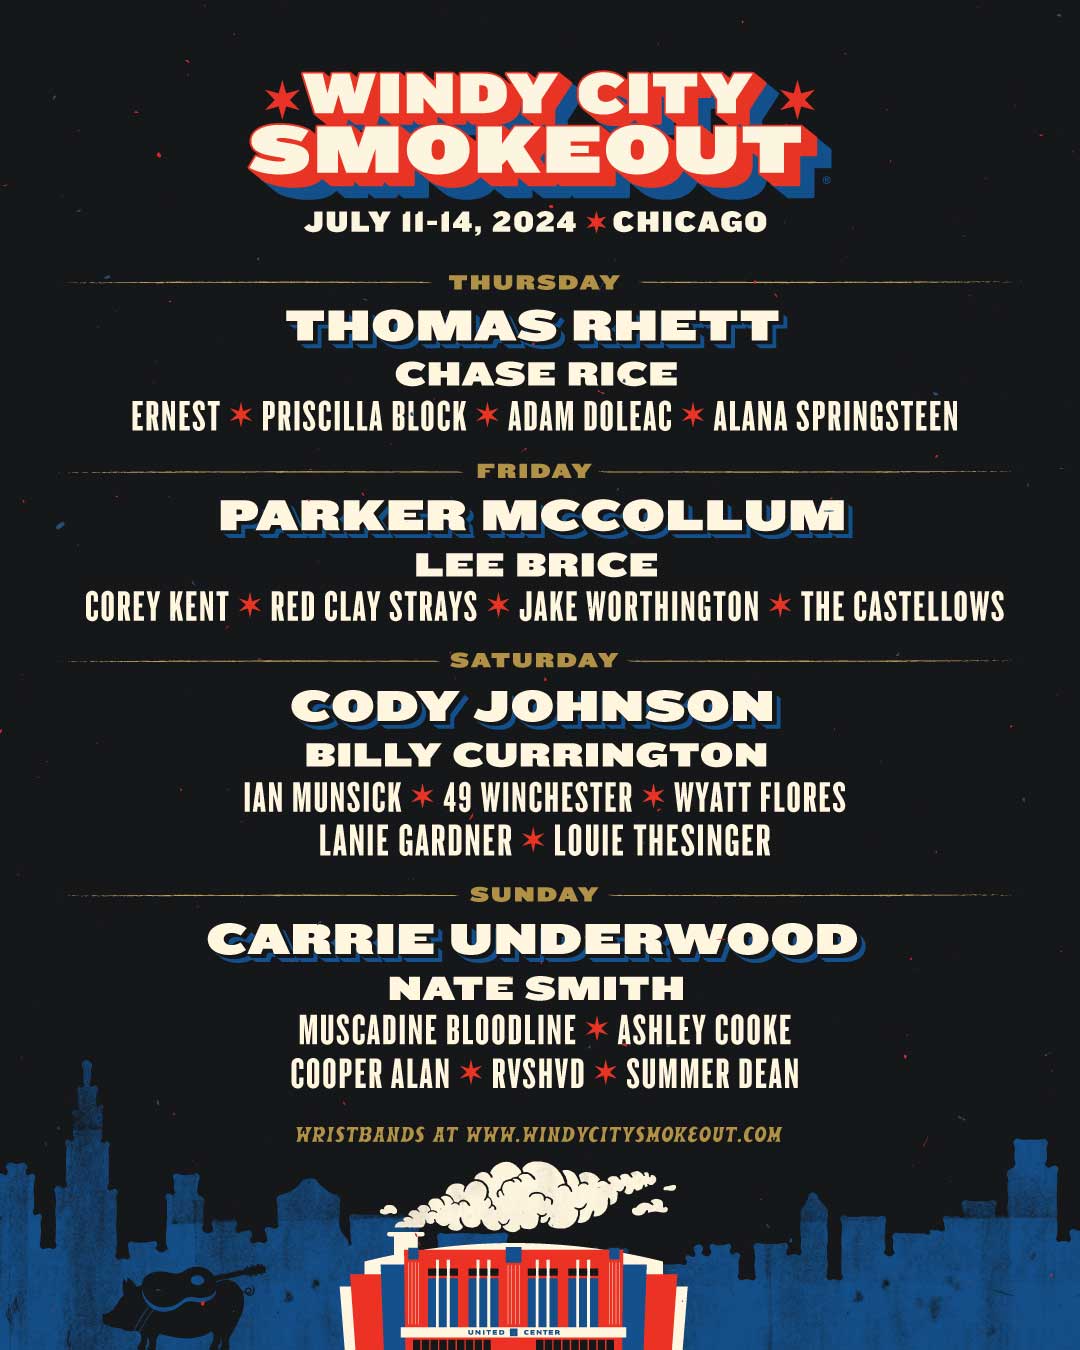 Windy City Smokeout Releases 2024 Daily Lineup Cody Johson, Parker